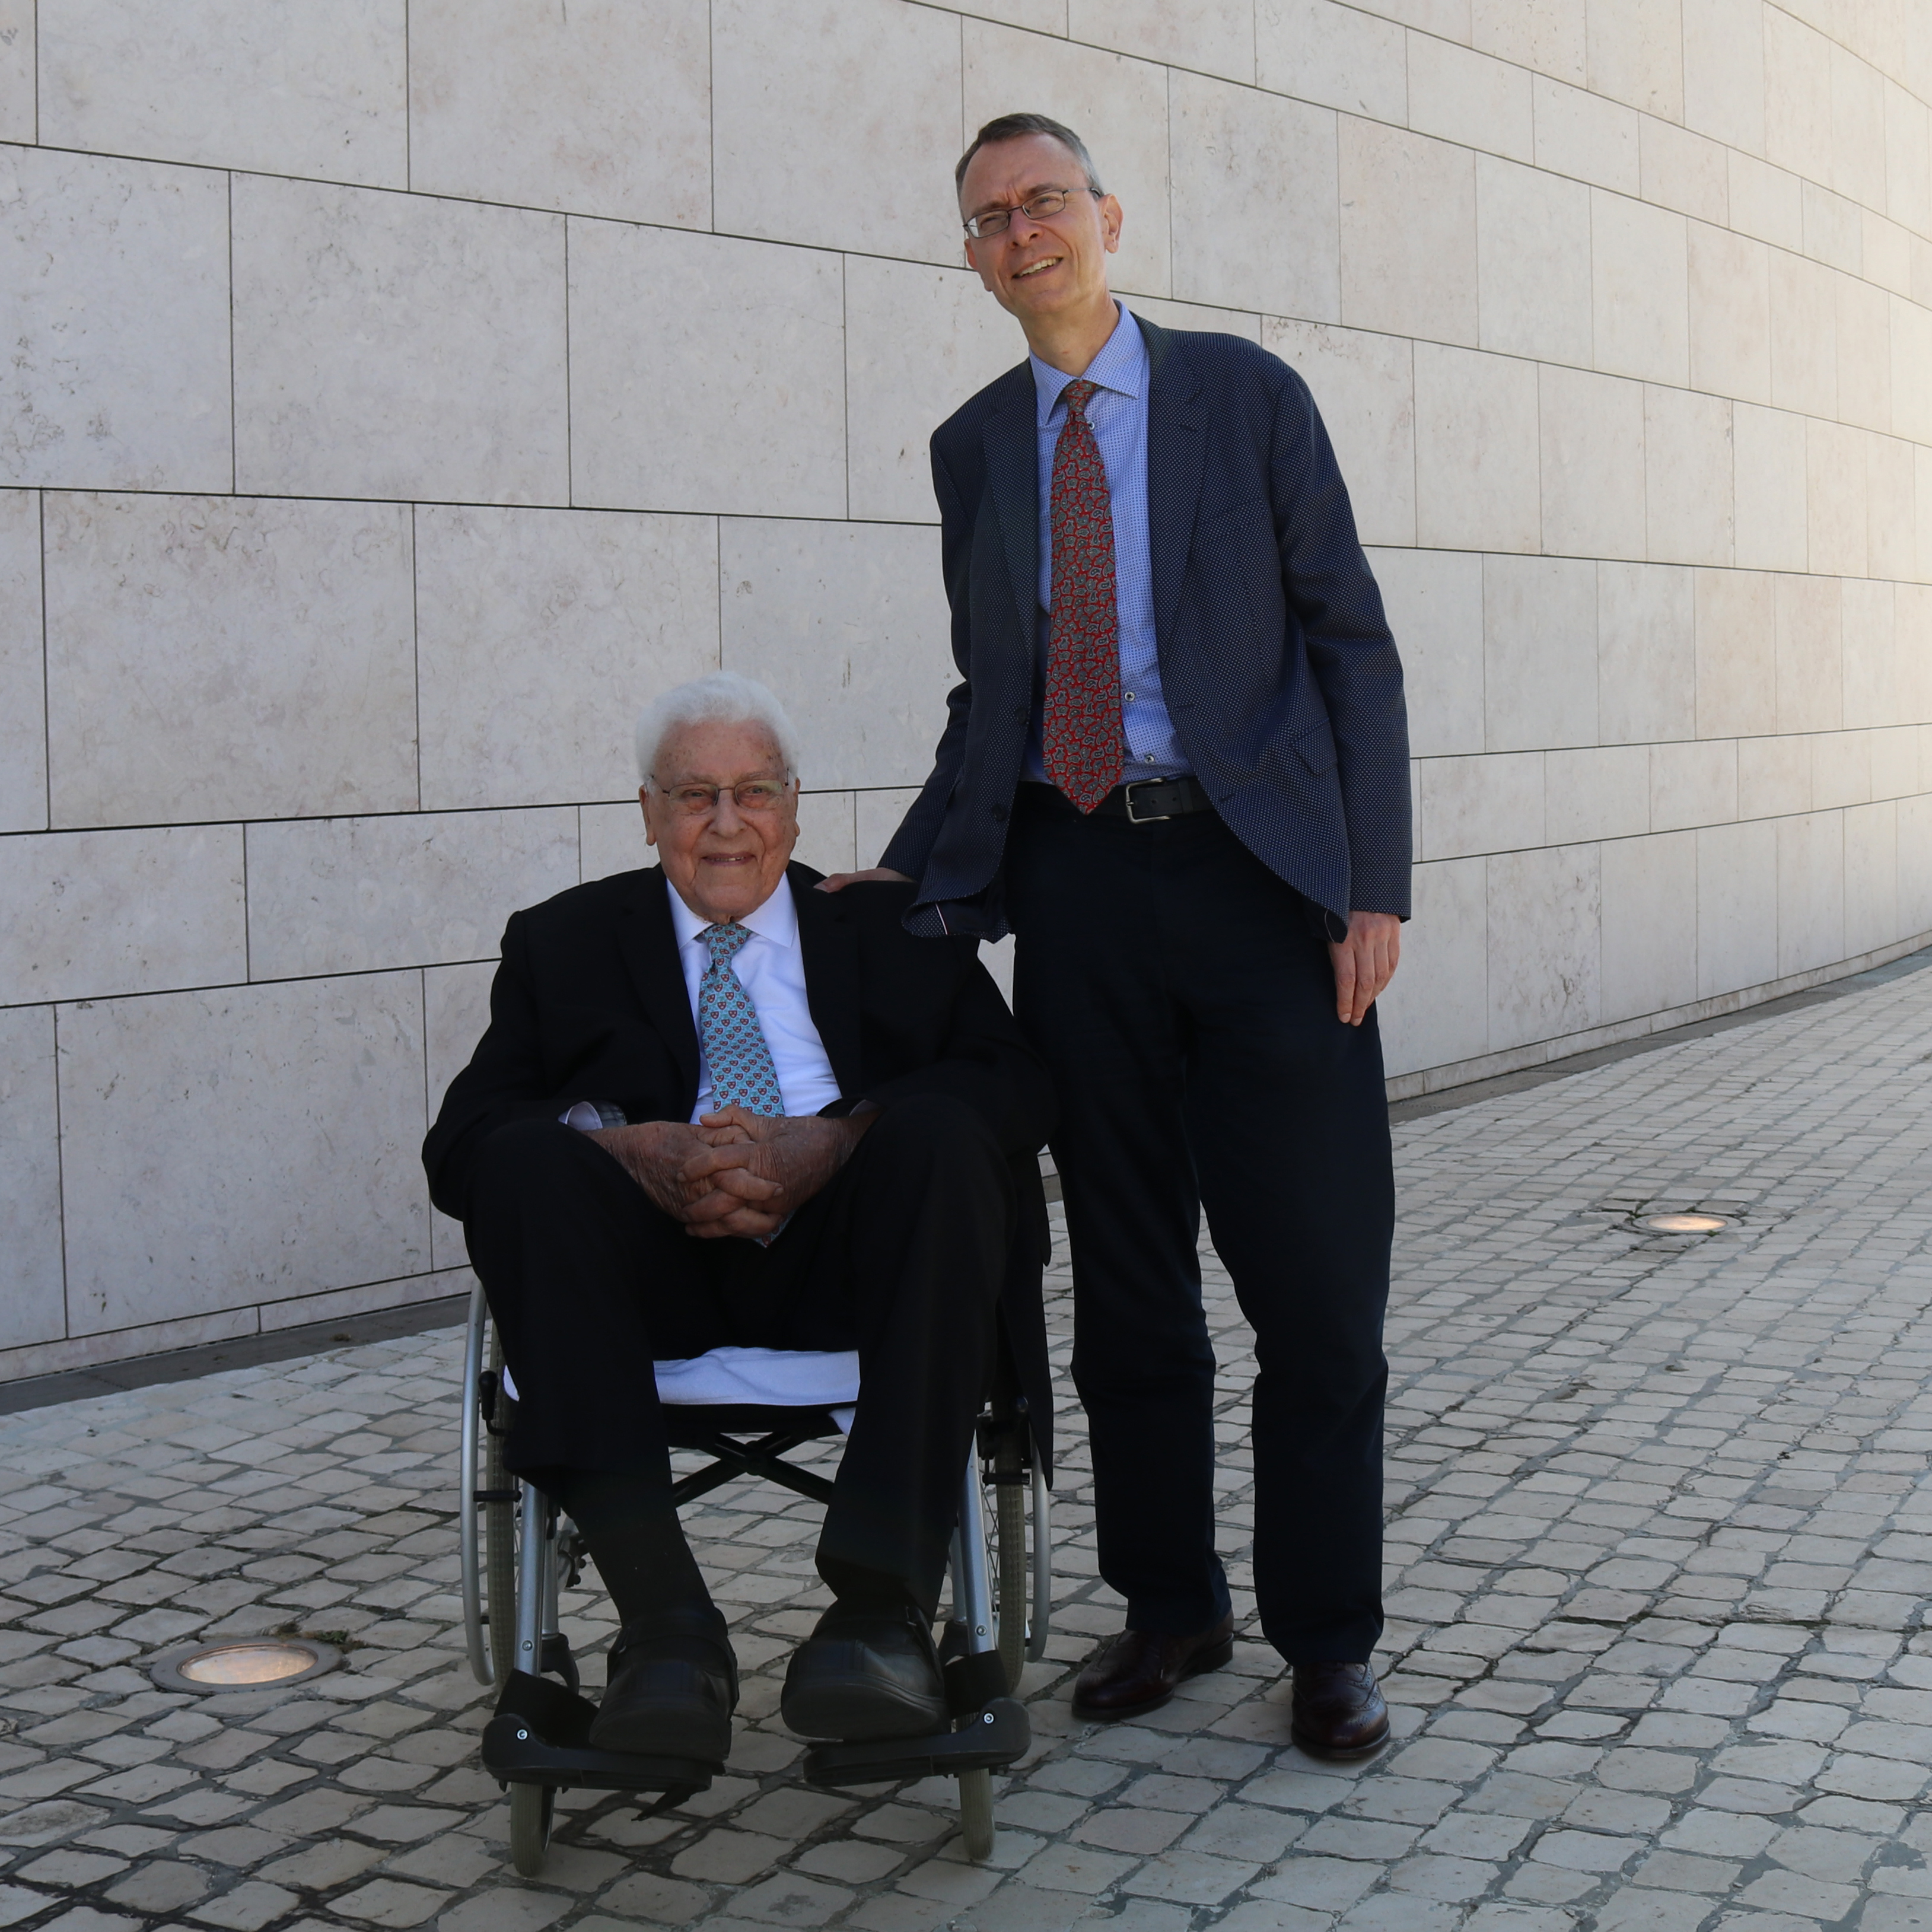 2022 António Champalimaud Vision Award recognises Gerrit Melles and Claes Dohlman for the research and treatment of Corneal Diseases